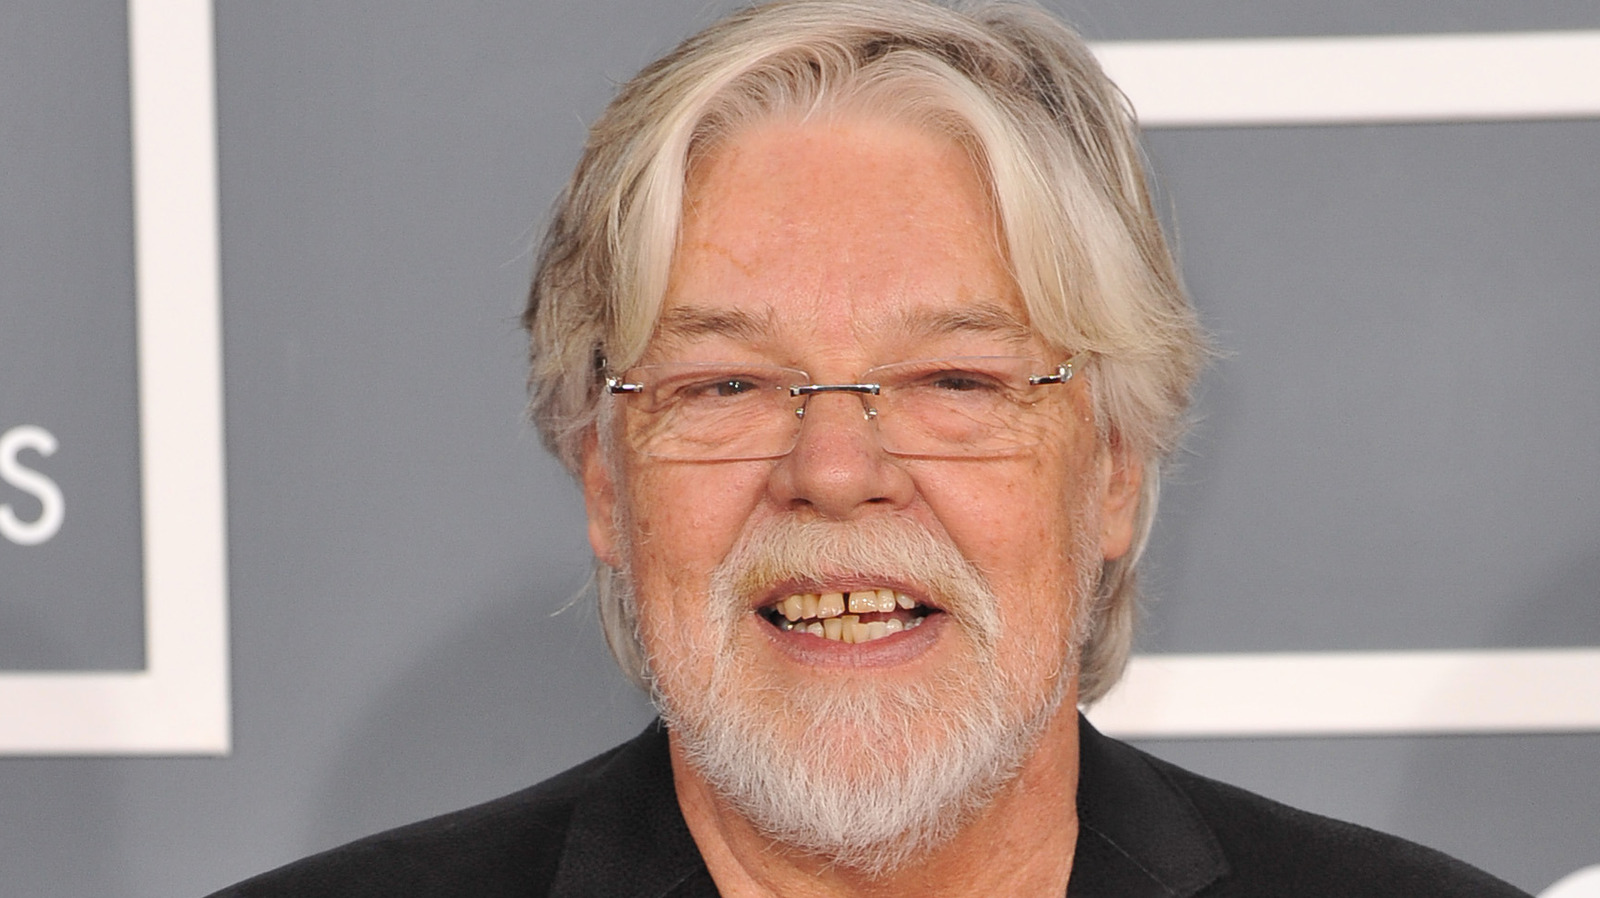 The Real Reason Bob Seger Might Be Done Touring